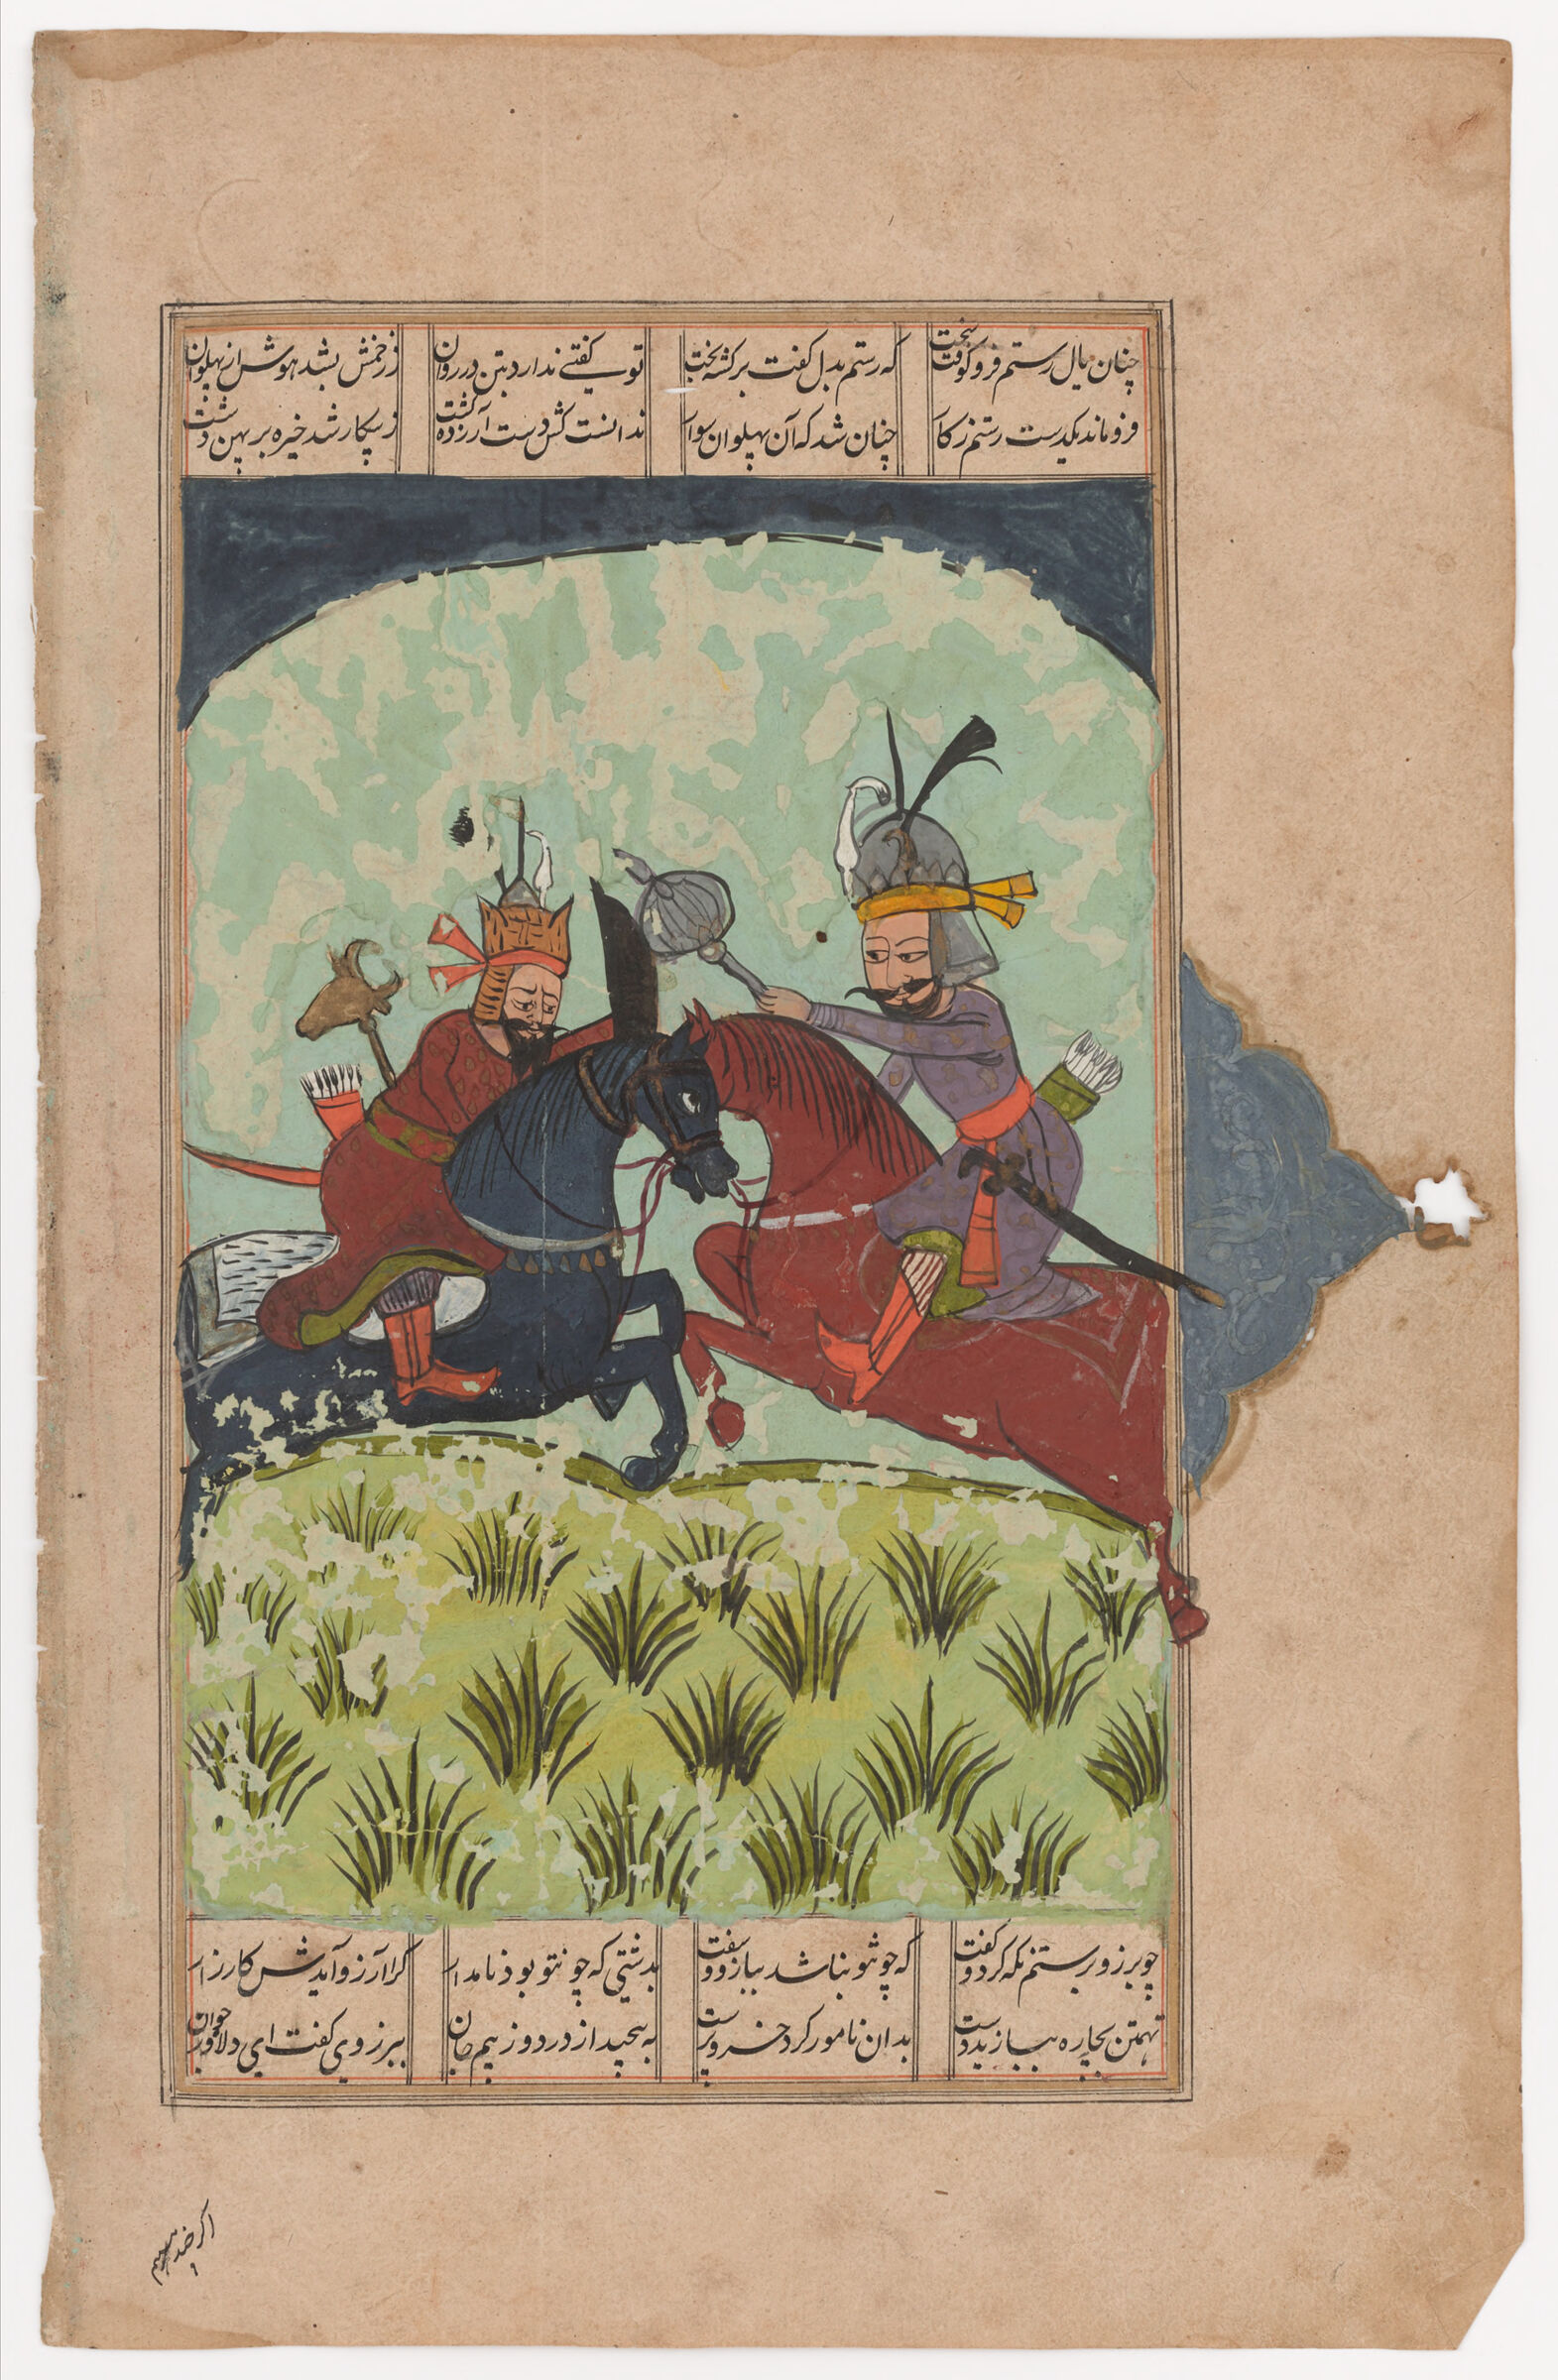 Barzu Challenges Rustam, Rustam Suffers A Broken Shoulder (Text Recto; Painting Verso Of Folio 246), Illustrated Folio From A Manuscript Of The Shahnama By Firdawsi